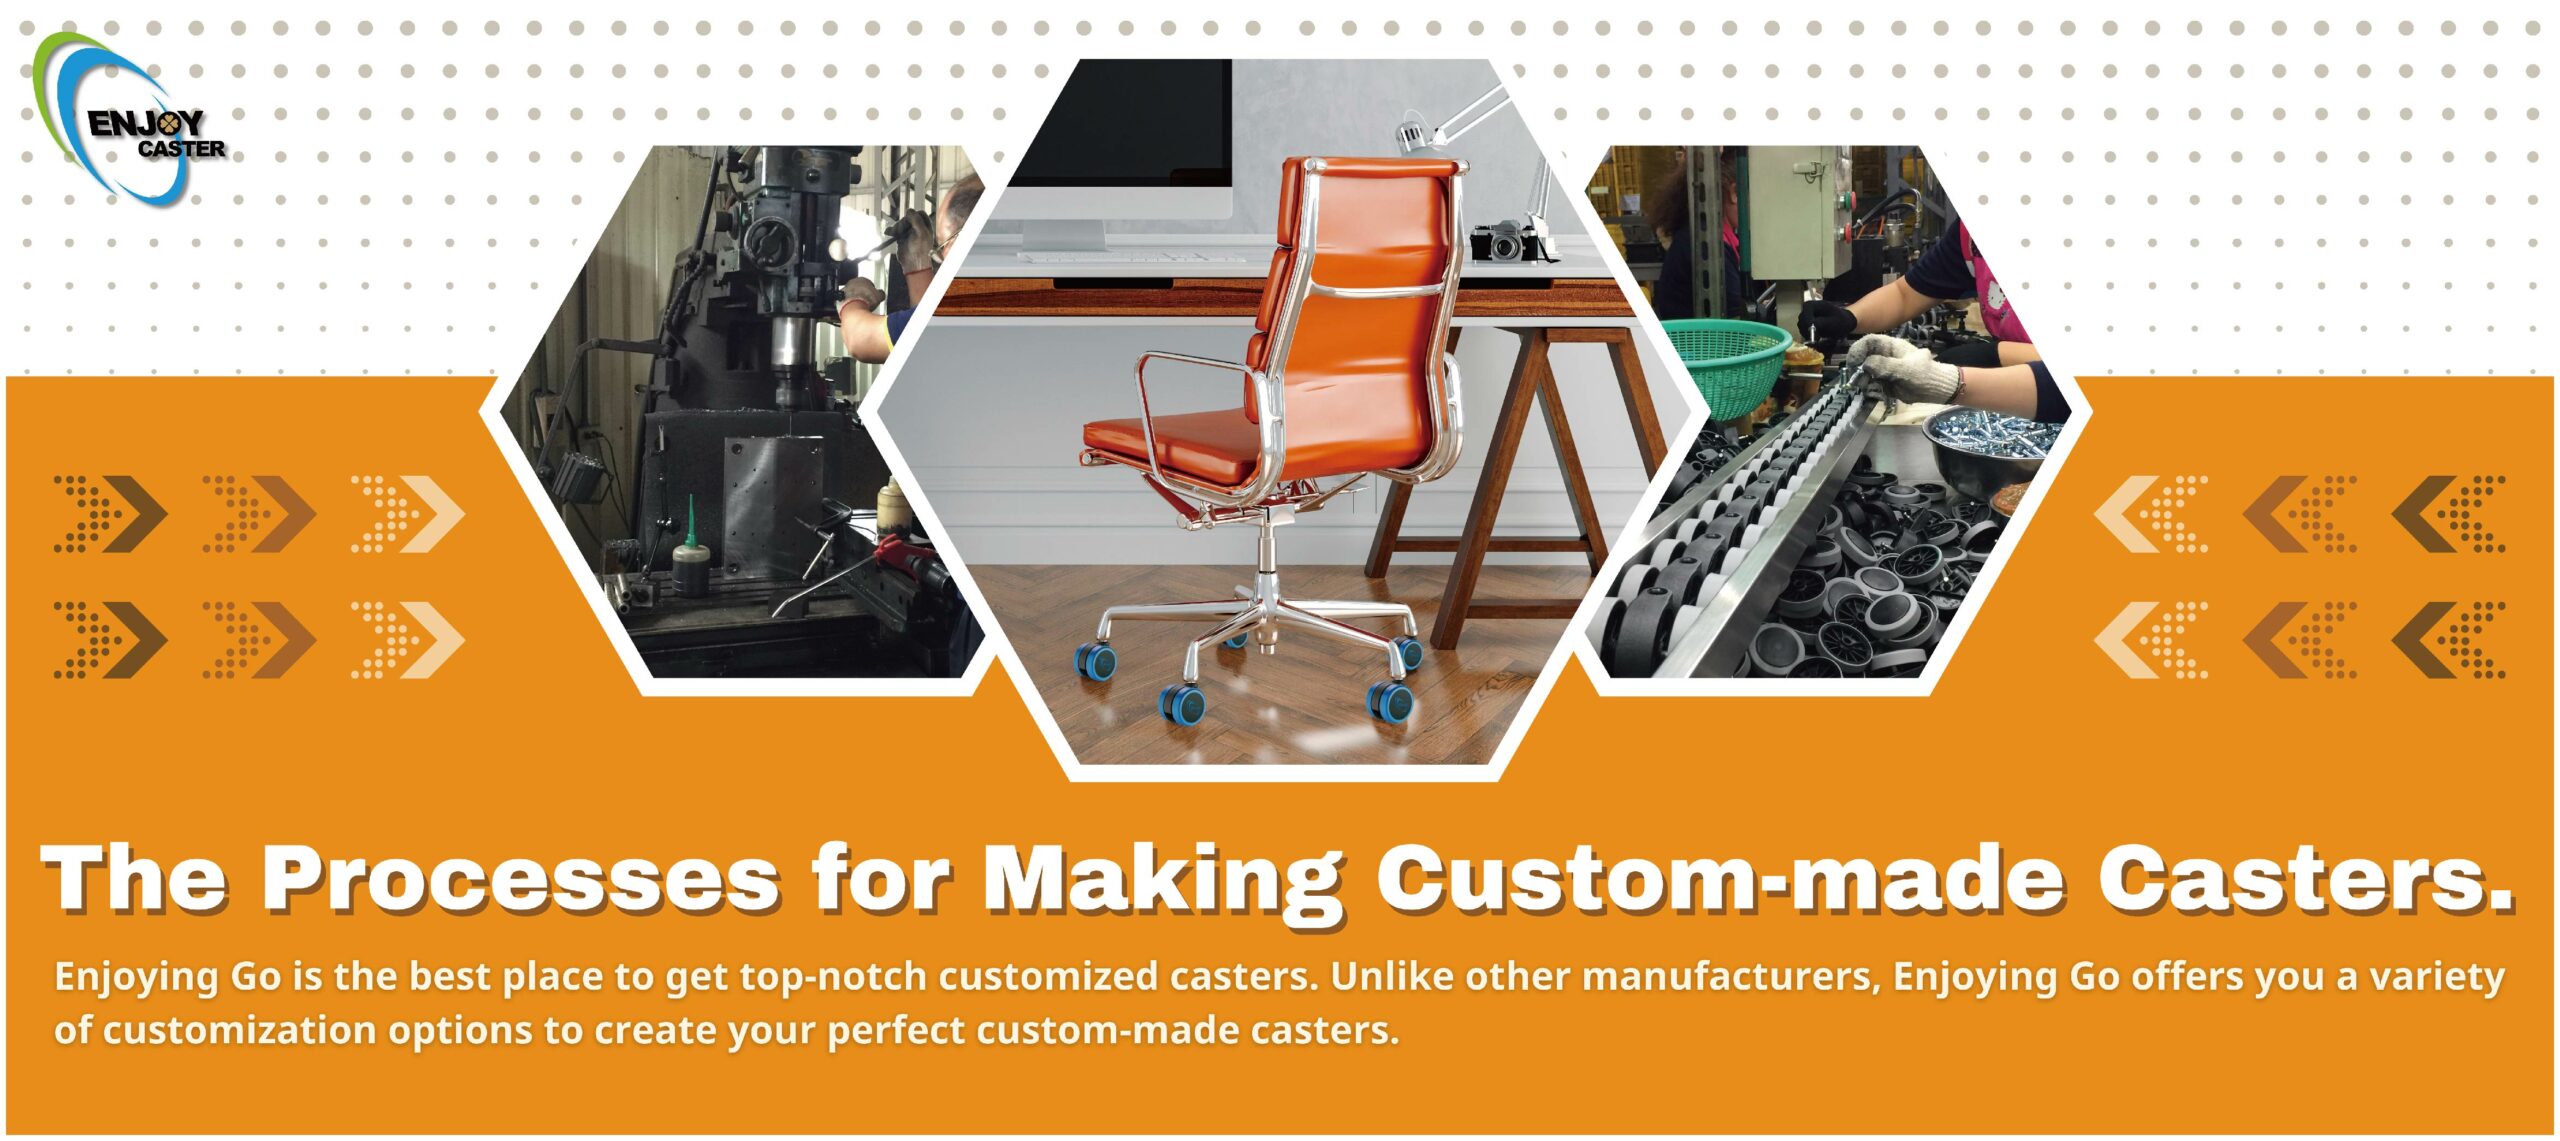 What are the processes for making custom-made casters?